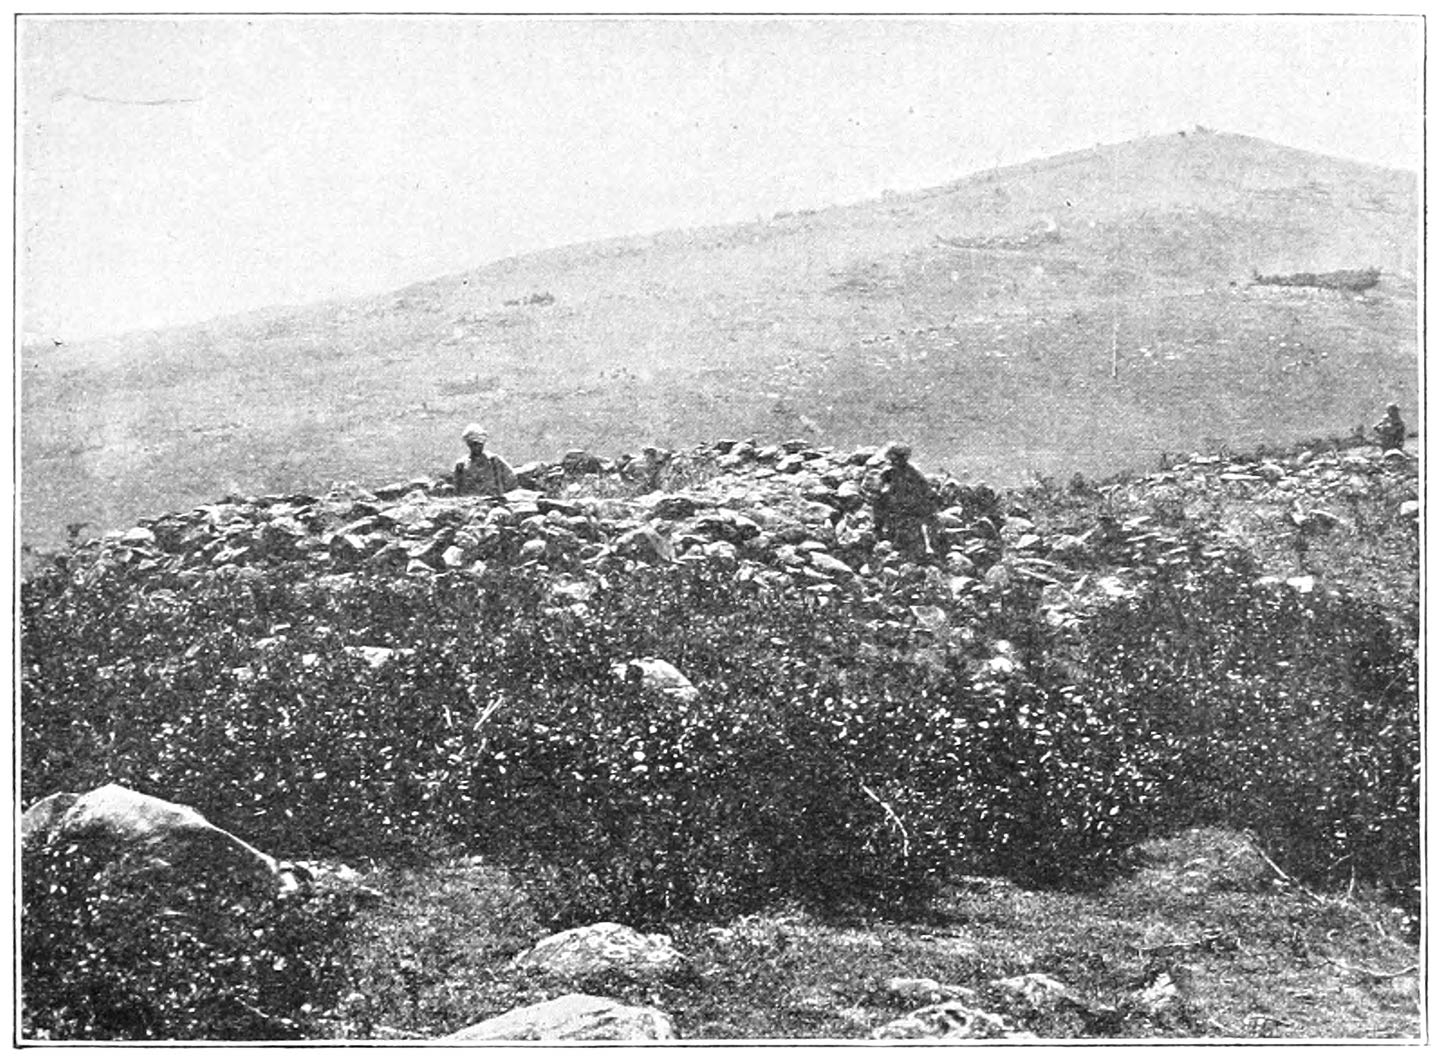 FIG. 75 (from Breeks).—A CAIRN ON THE NILGIRI HILLS.